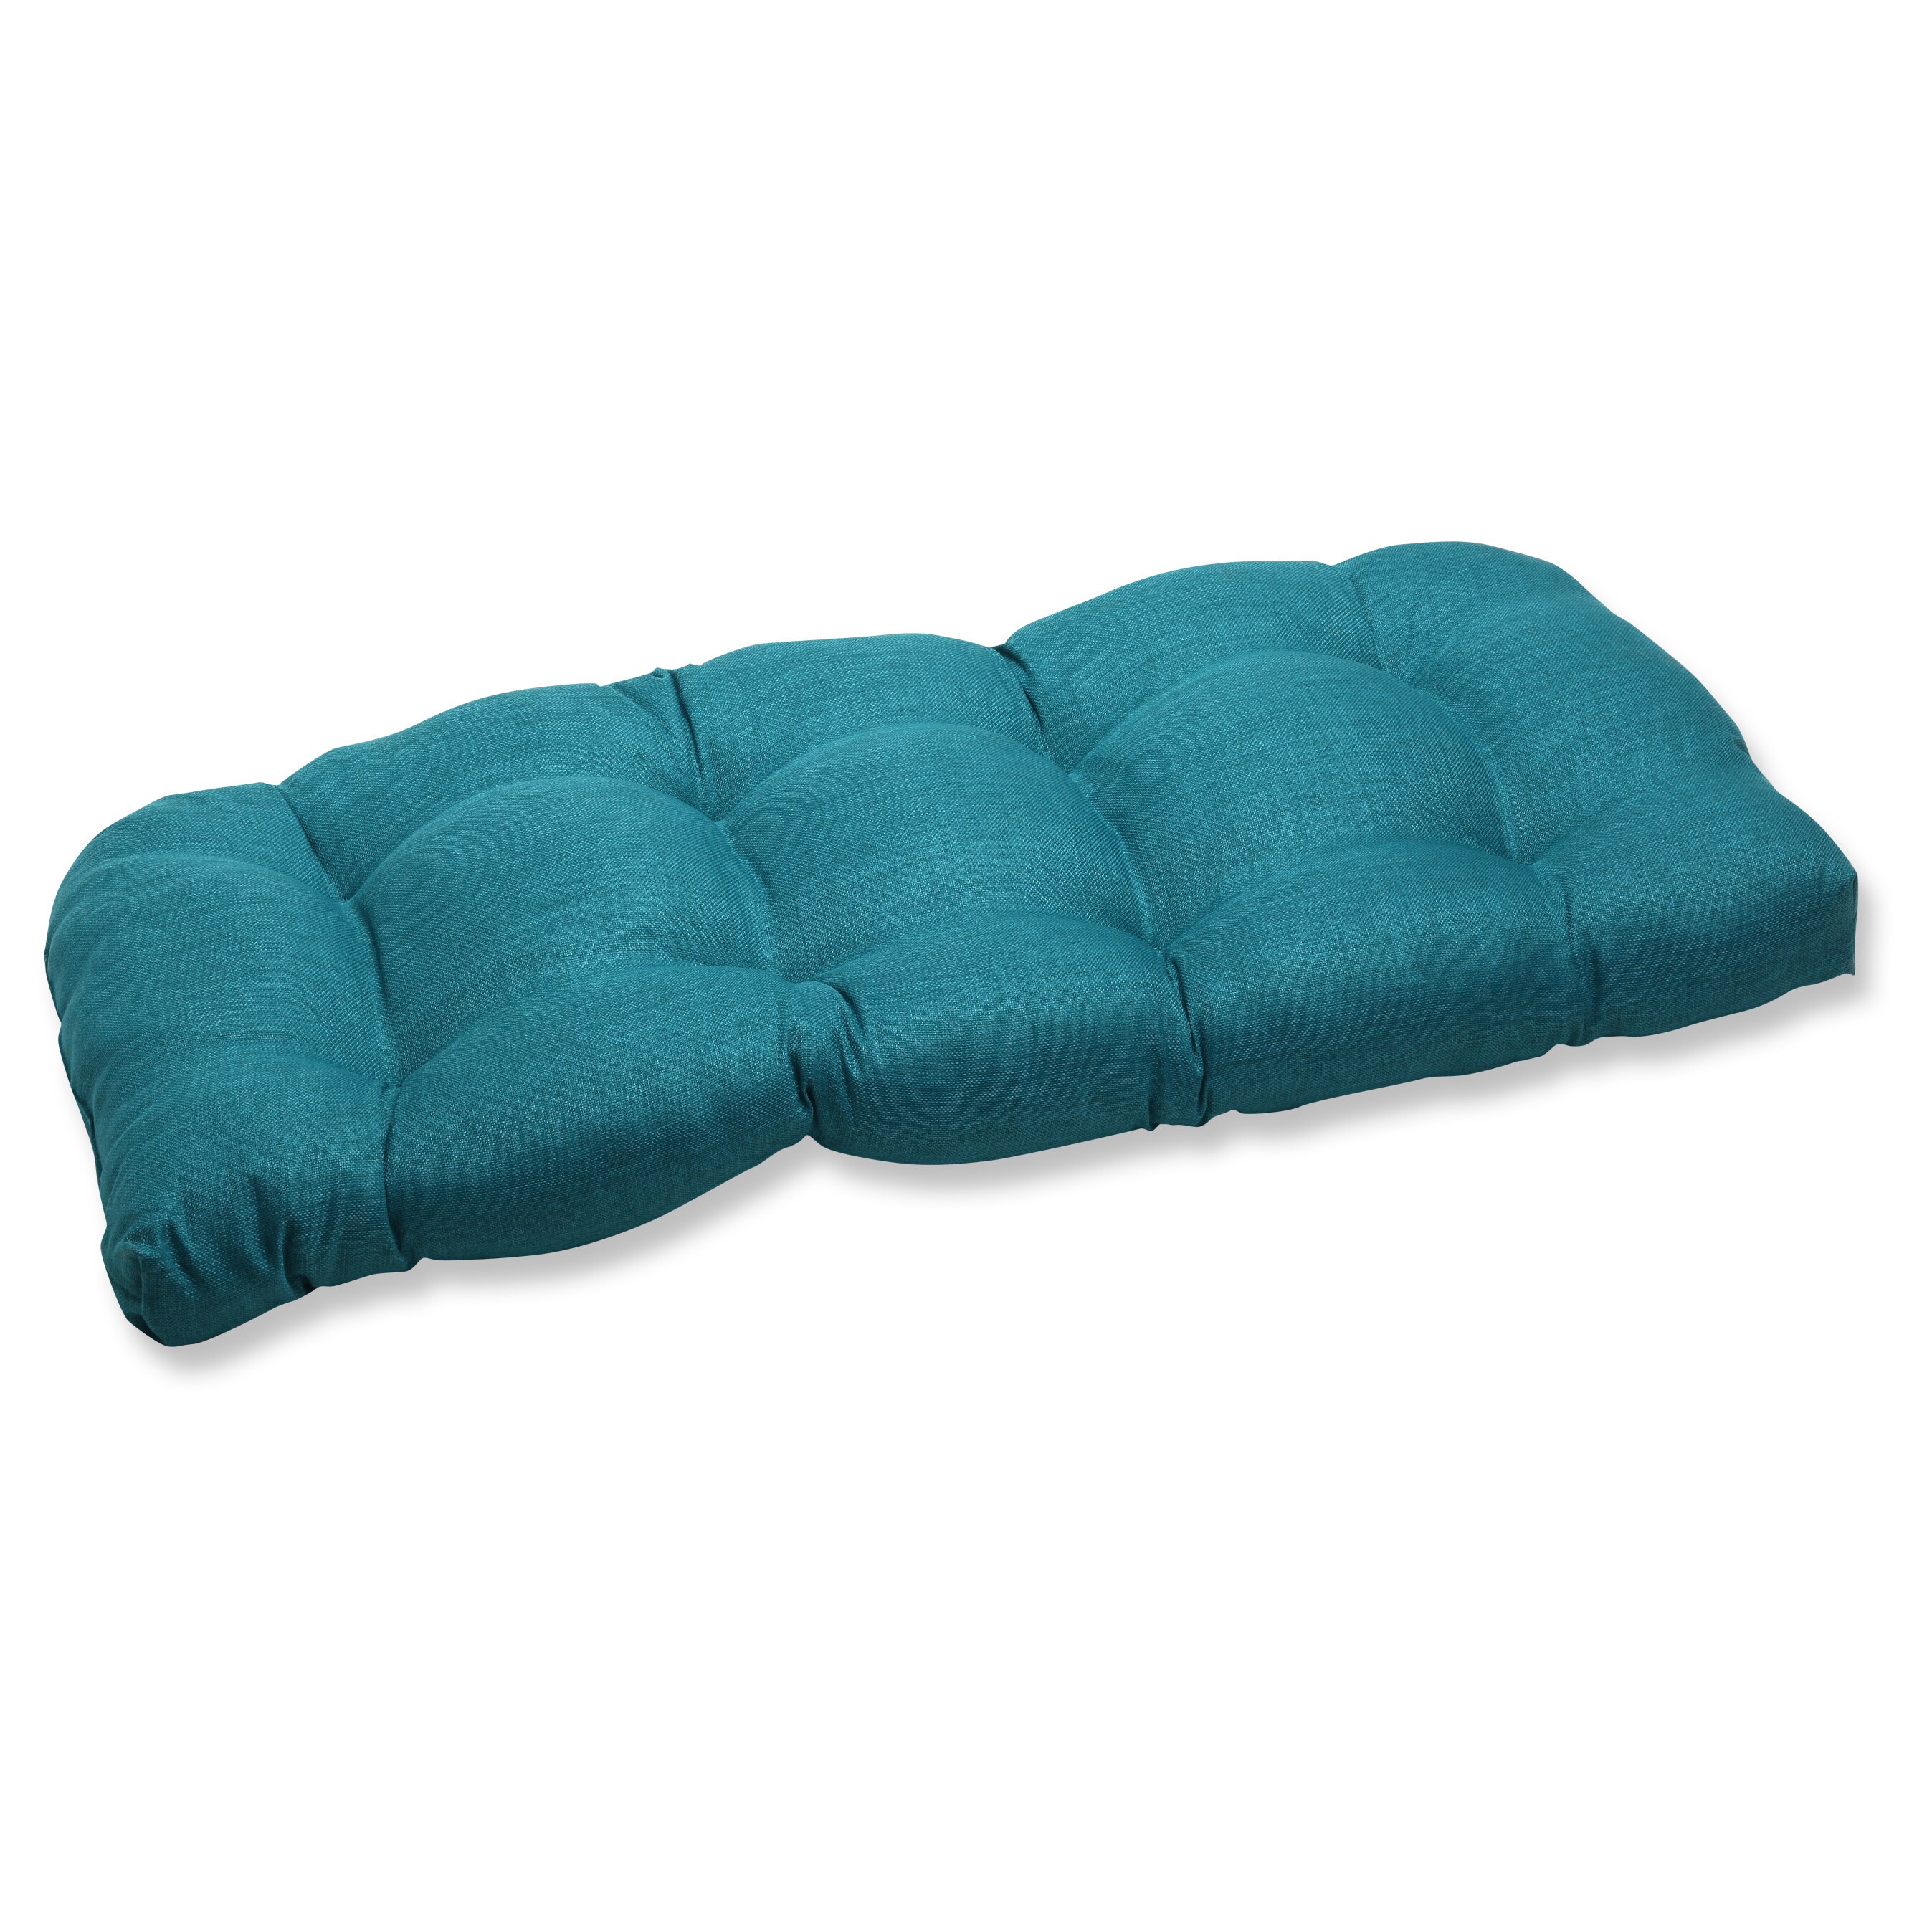 Pillow Perfect Outdoor Teal Wicker Loveseat Cushion